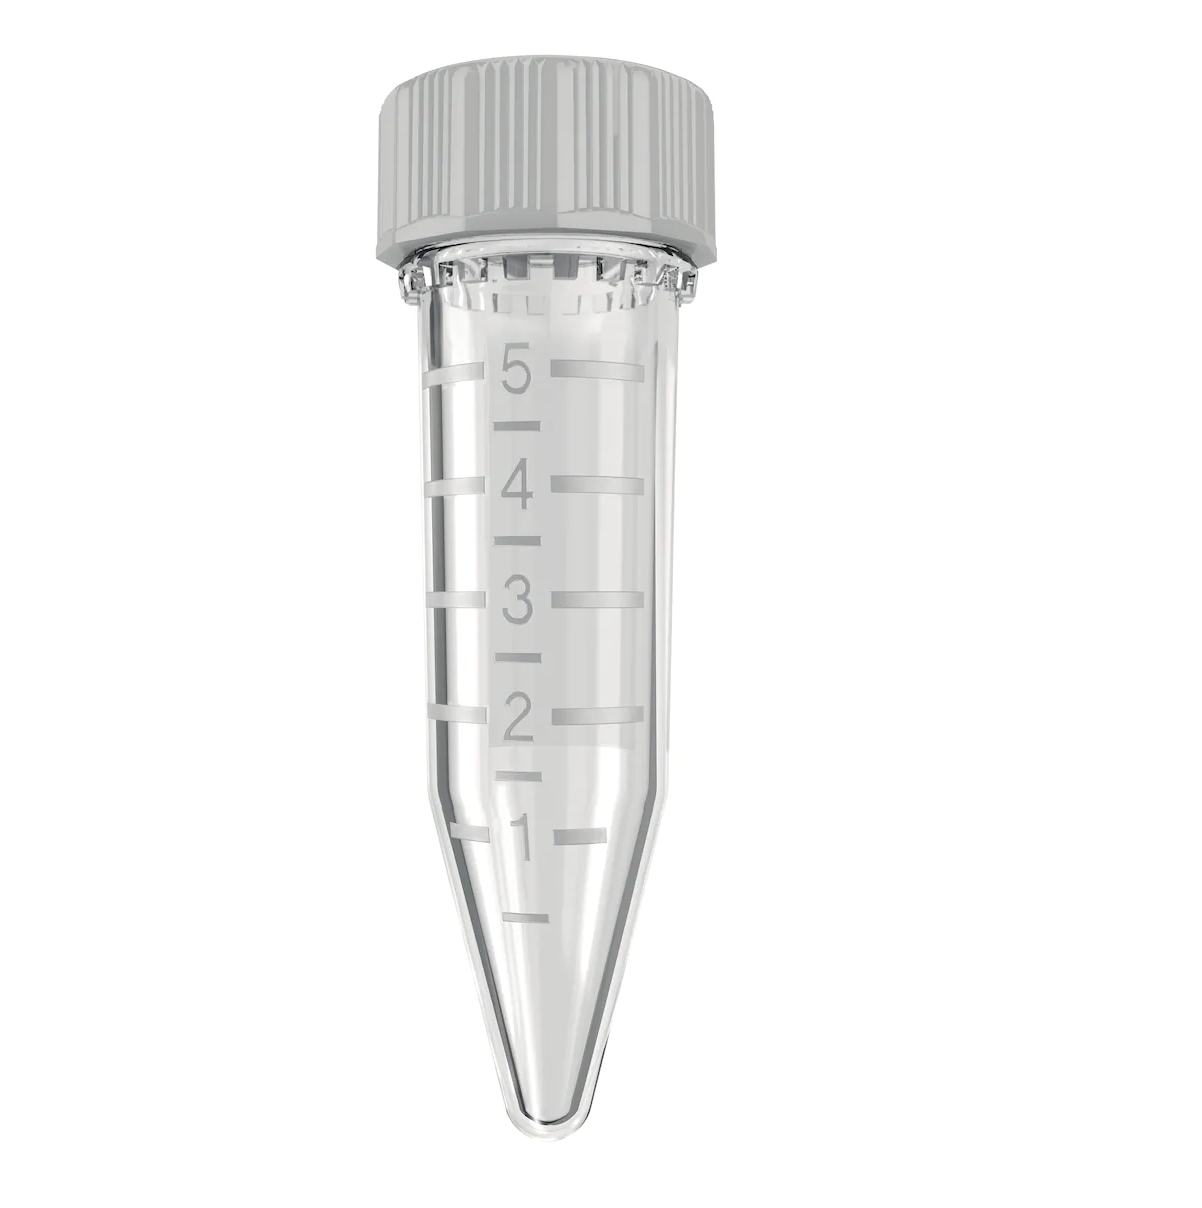 Eppendorf Tubes® 5.0 mL with screw cap, 5 mL, 2D SafeCode, sterile, pyrogen-, DNase-, RNase-, human and bacterial DNA-free, 200 tubes (2 bags × 100 tubes)